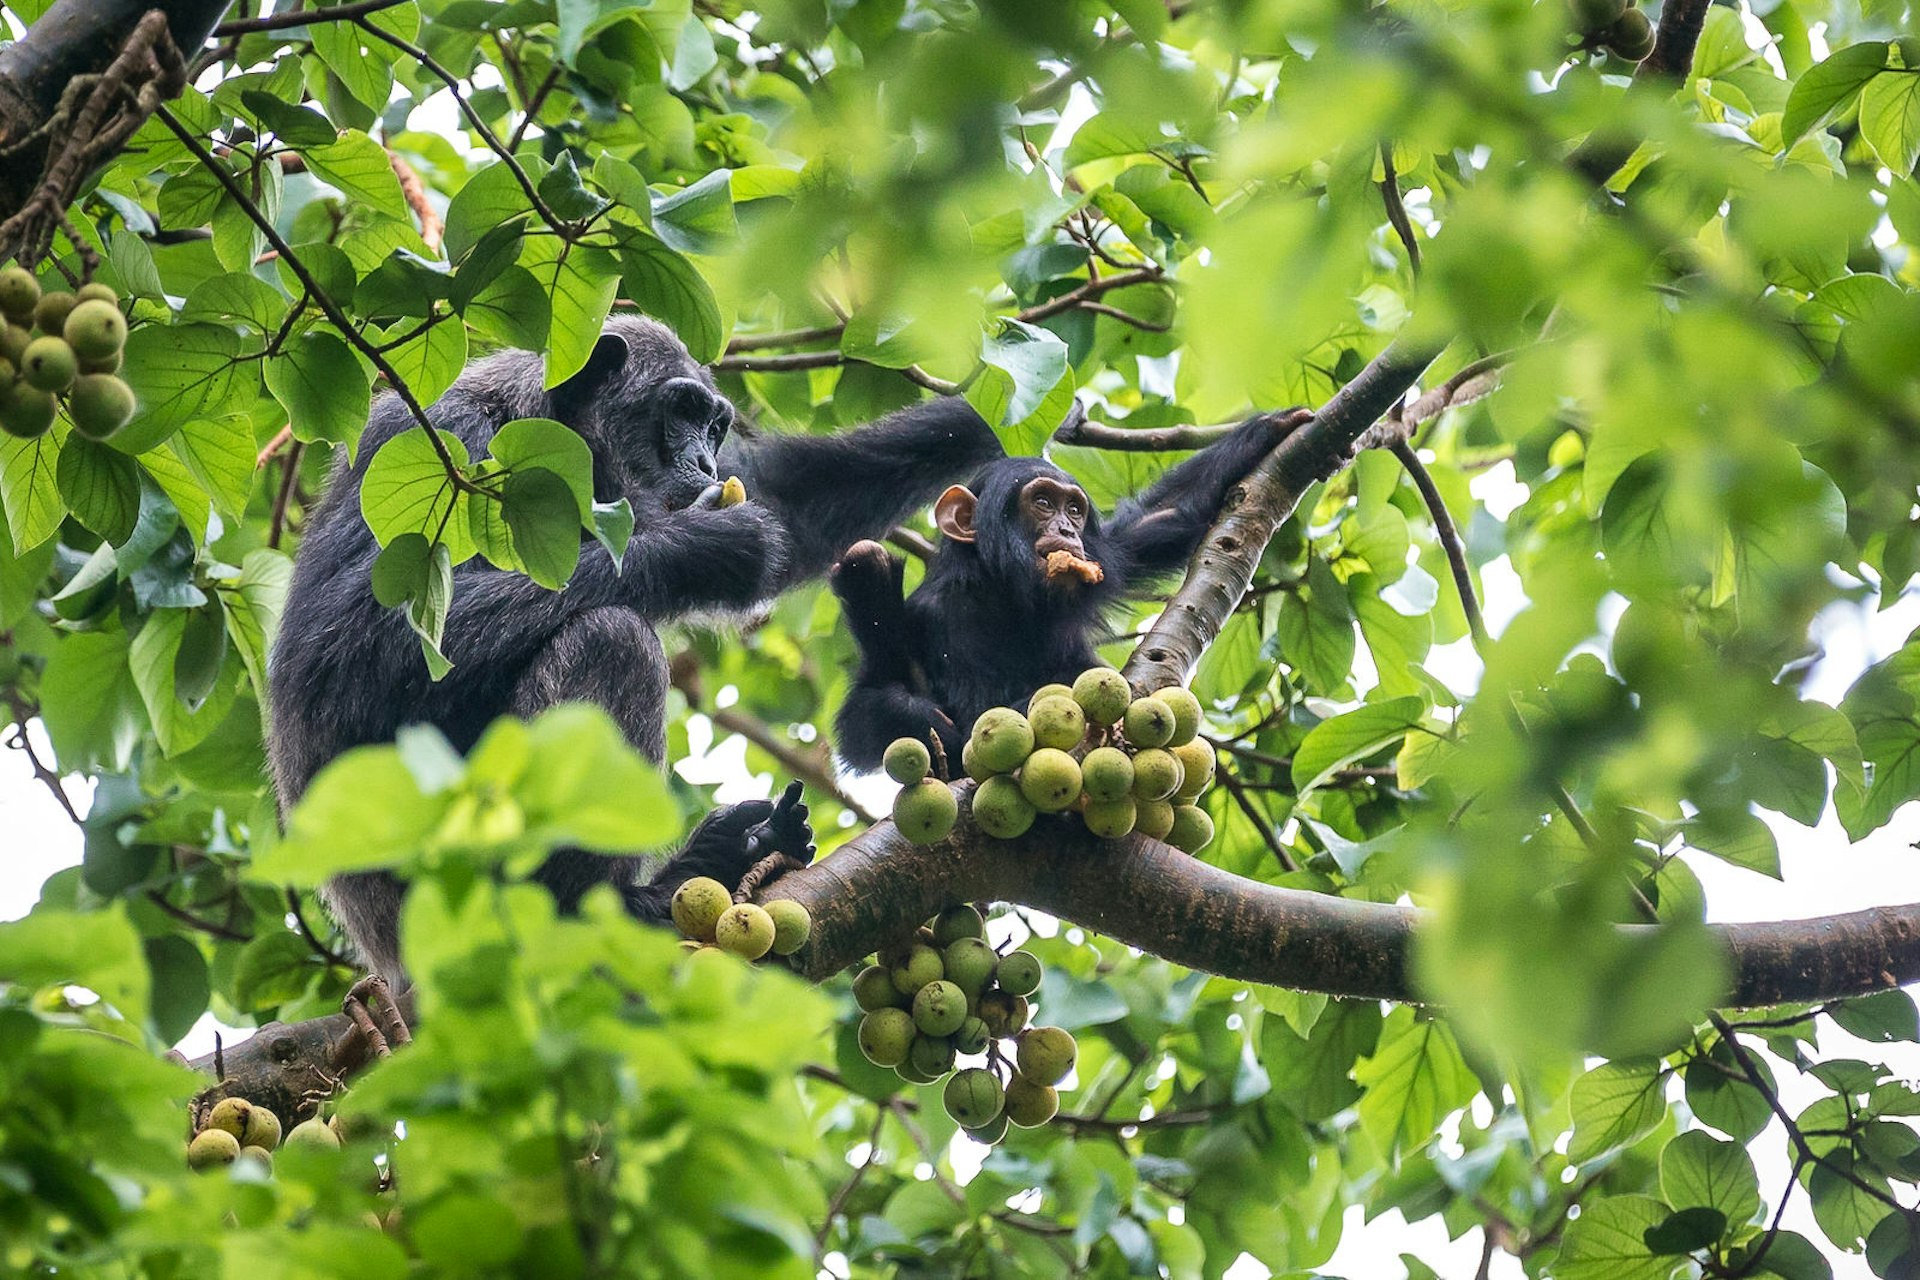 A baby chimpanzee has its mouth full of fruit, with one hand on a branch and the other grasping more fruit, while an elder chimp sits down the same branch and carefully tastes a piece of fruit - bunches of fruit hang from the branch they are sitting on © Bella Falk